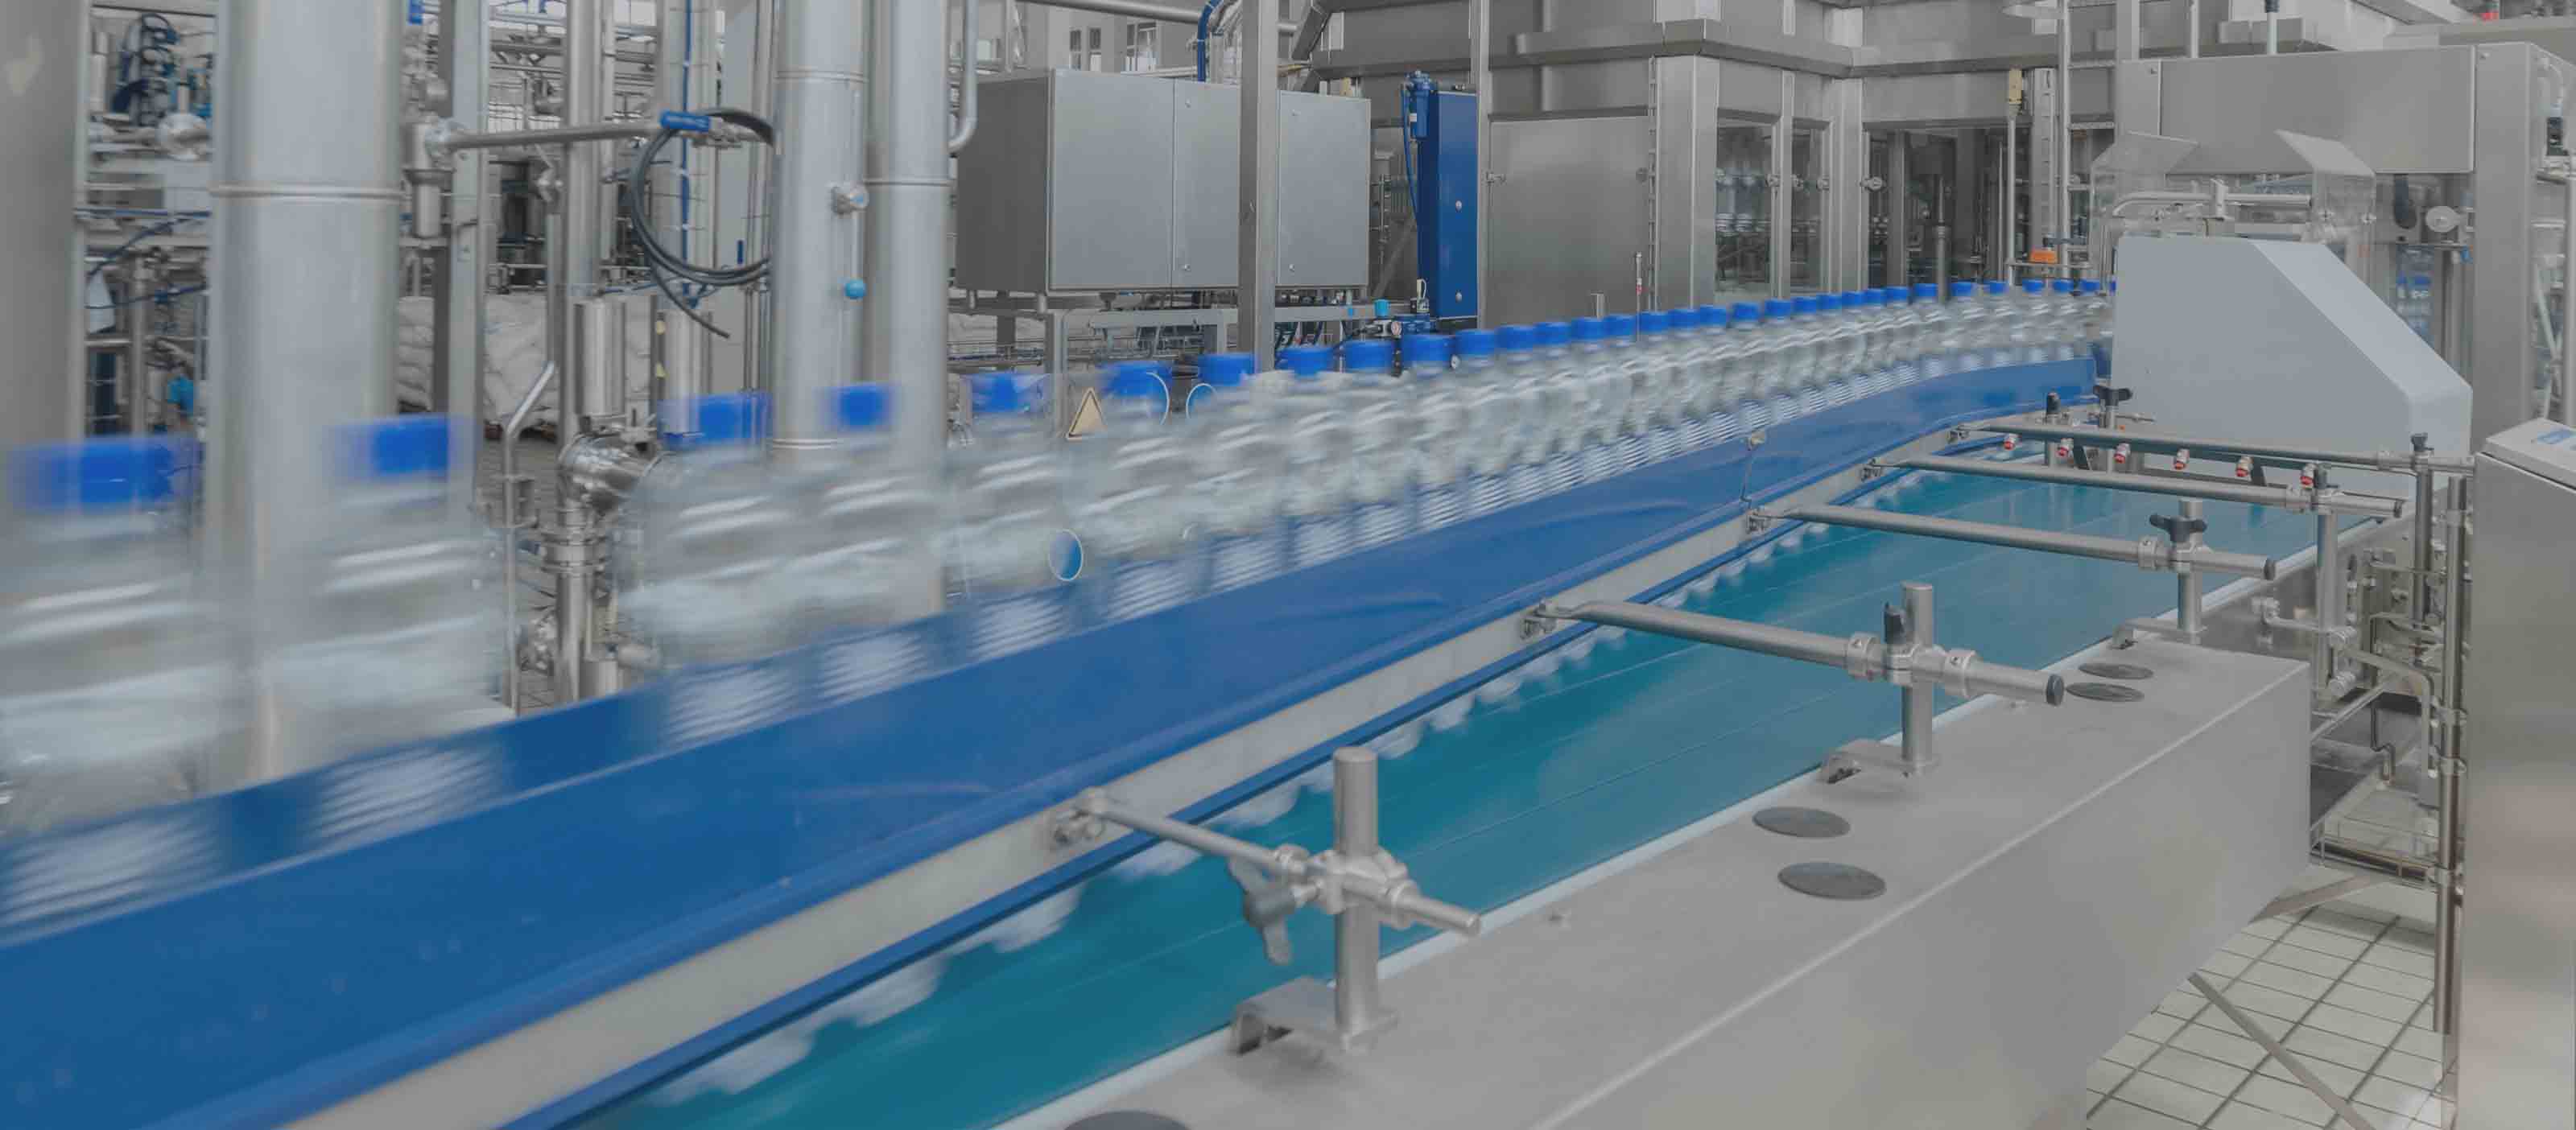 GE Digital Proficy software helps bottling and beverage manufacturers improve operations